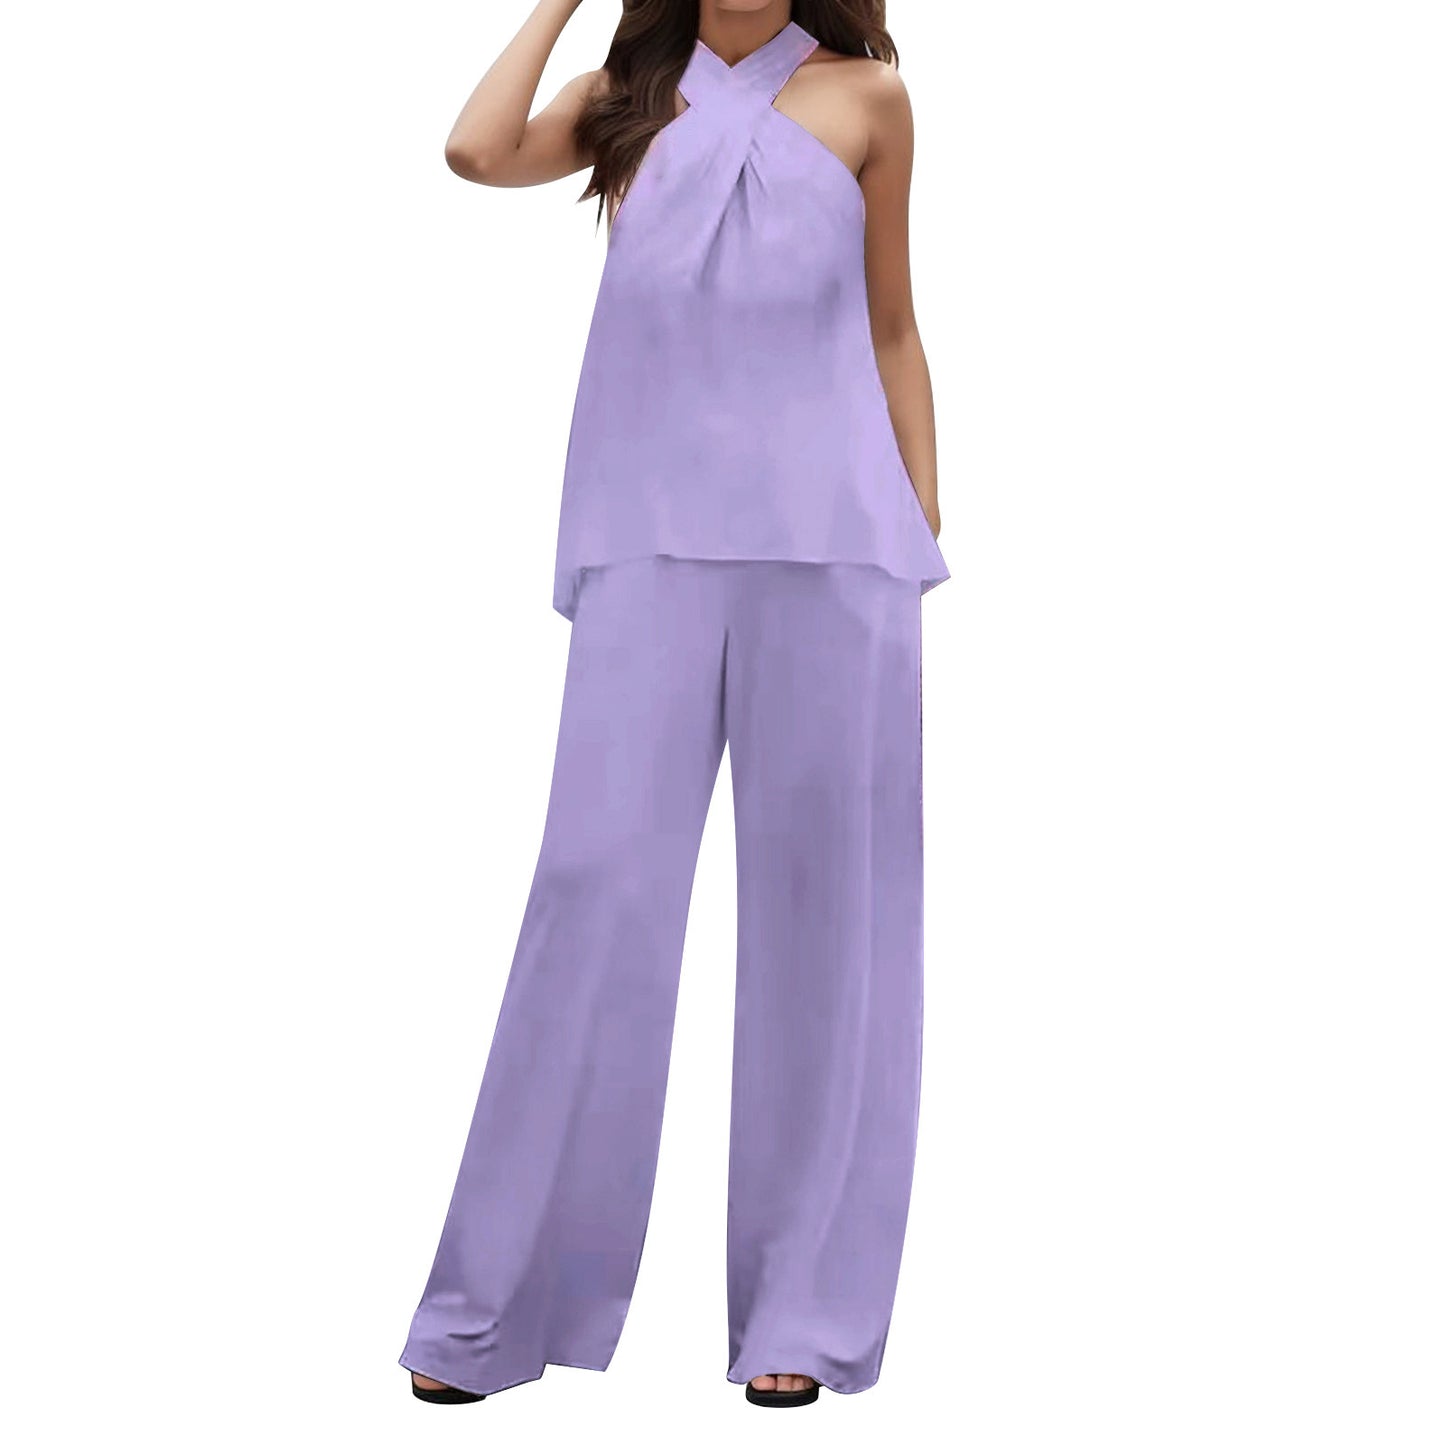 Solid Color Sleeveless Halter Top with V-neck and Elastic Waist Wide Leg Pants